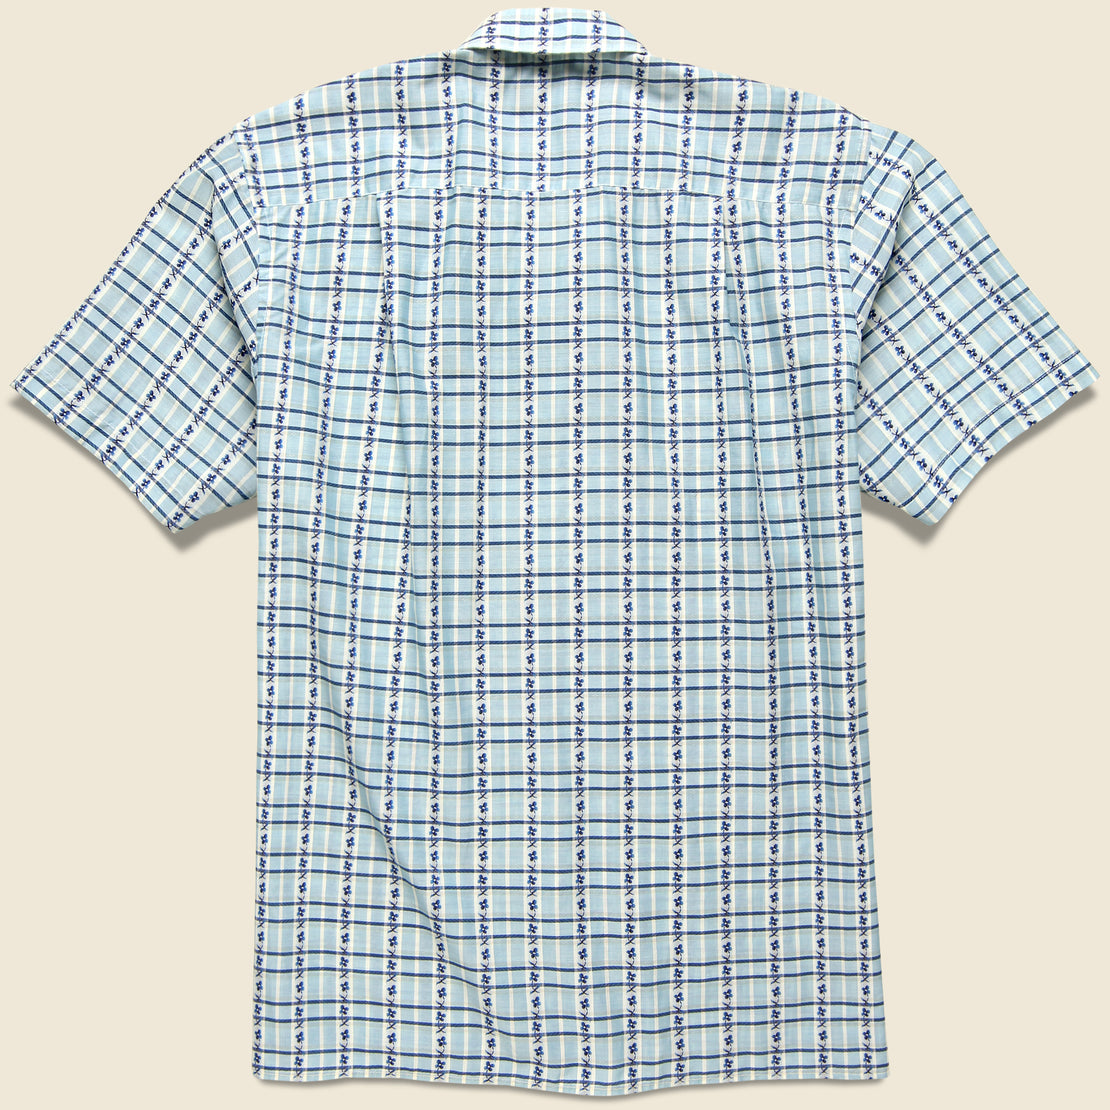 Archive Summer Jacquard Camp Shirt - Blue - Gitman Vintage - STAG Provisions - Tops - S/S Woven - Plaid